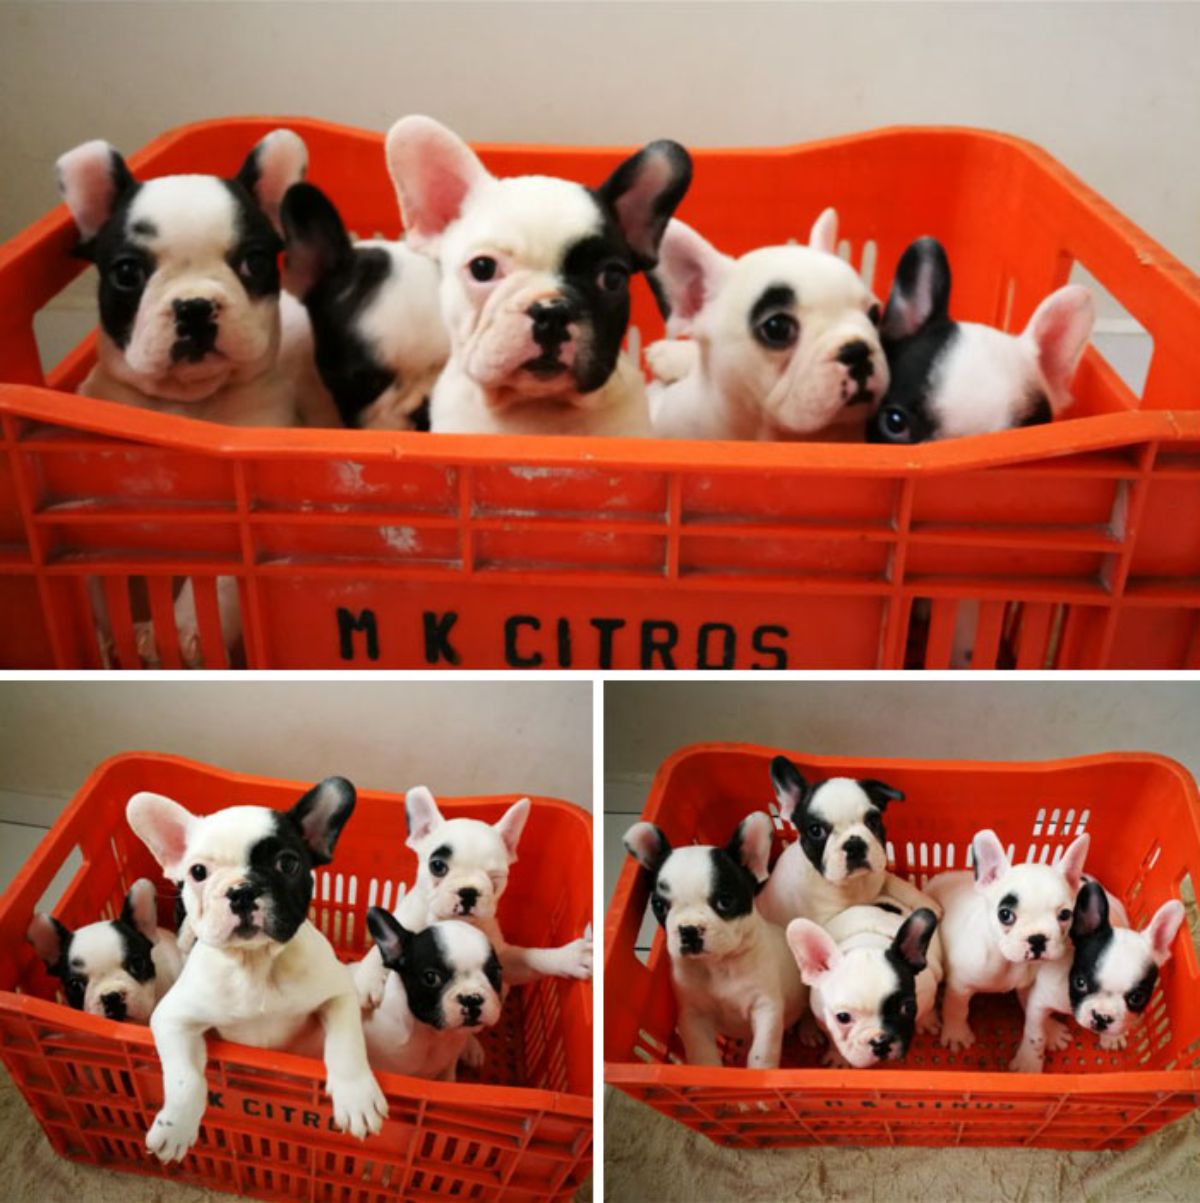 black and white puppies in an orange basket